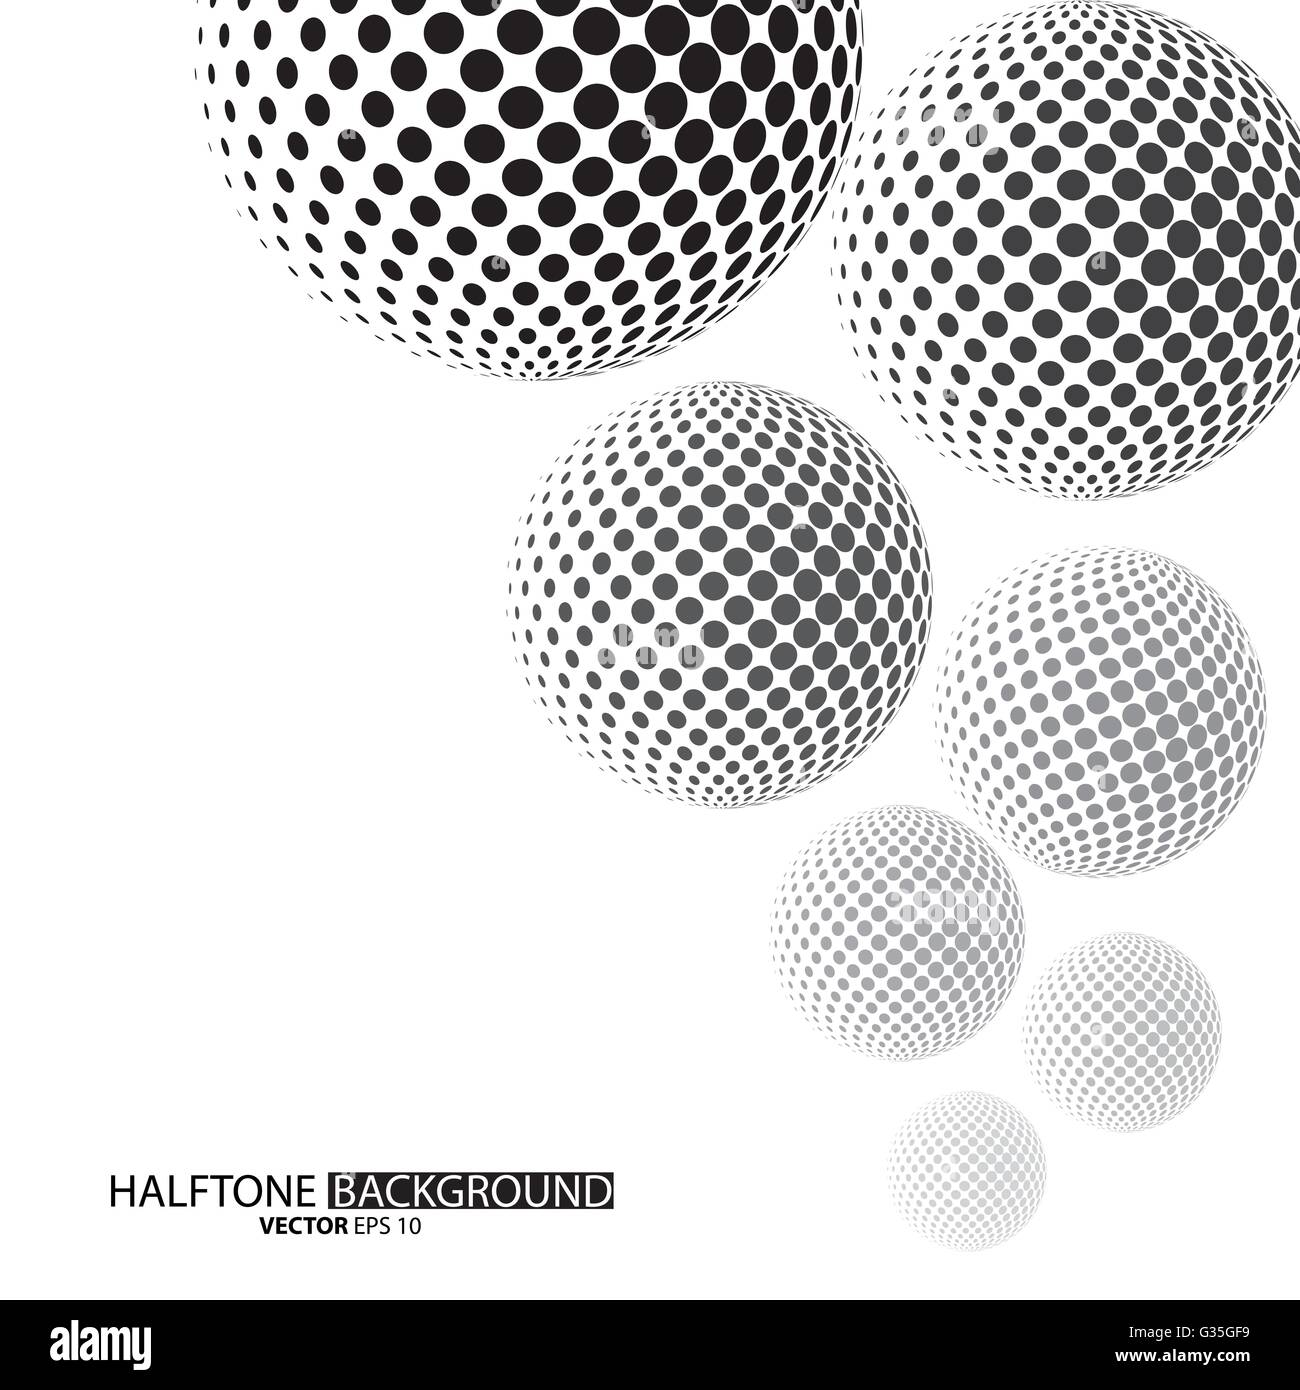 Black Dots Halftone Background Can Be Use For Pattern Backdrop Images, Photos, Reviews